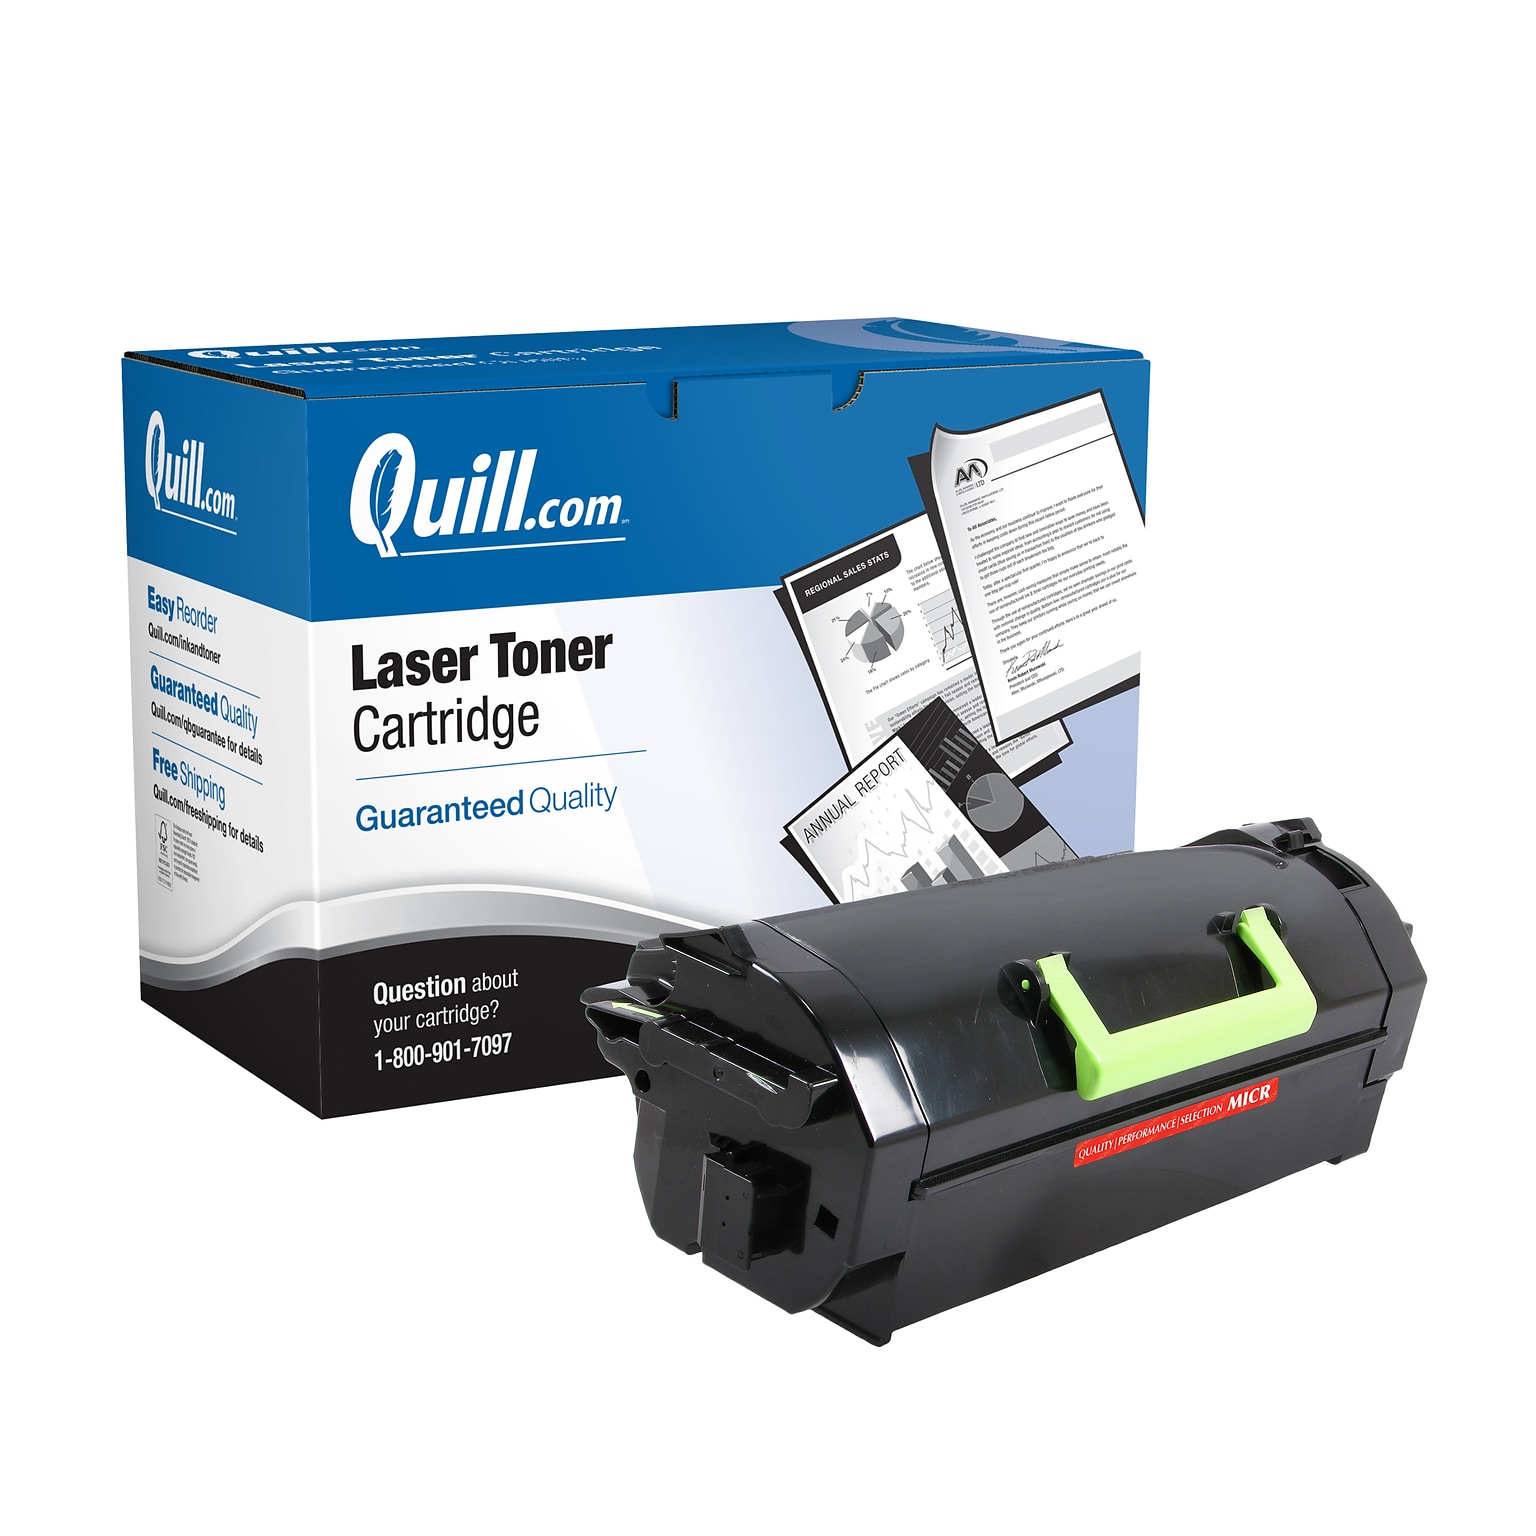 Quill Brand® Remanufactured Black High Yield MICR Toner Cartridge Replacement for Lexmark MS710 (52D0HA0) (Lifetime Warranty)